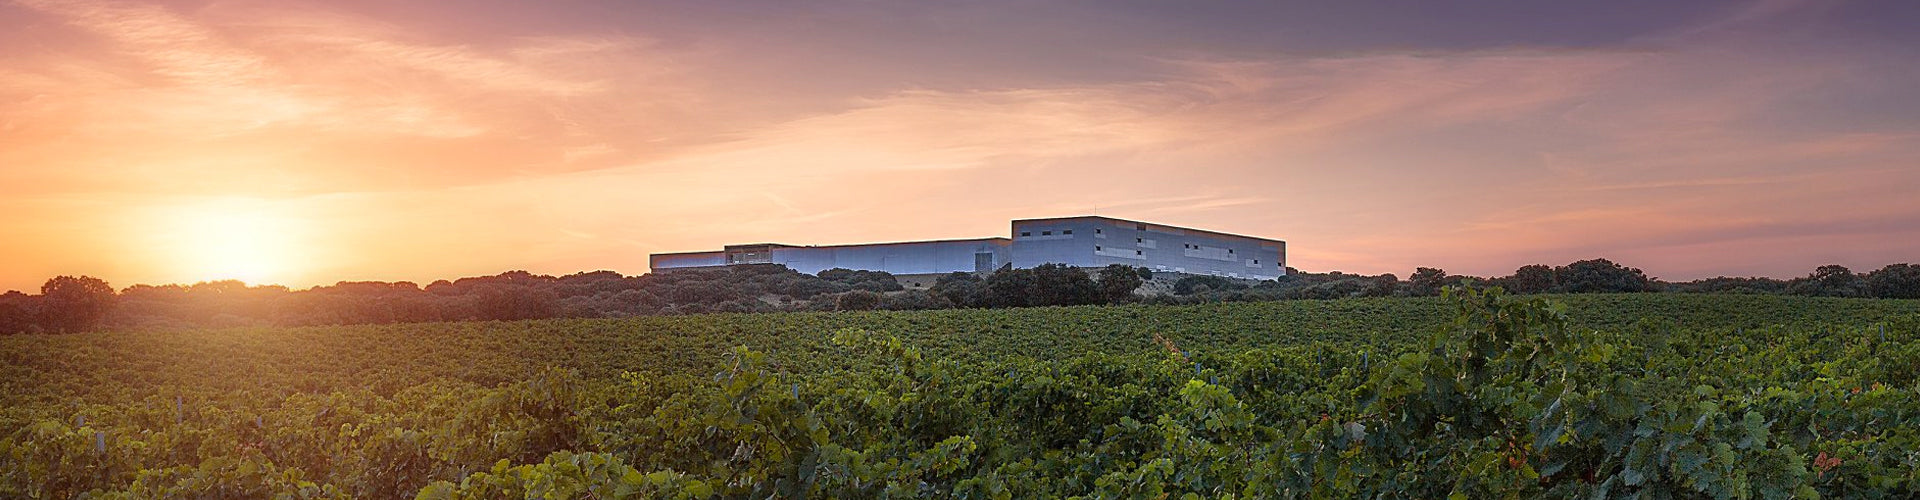 Finca Antigua Winery Building and Vineyards